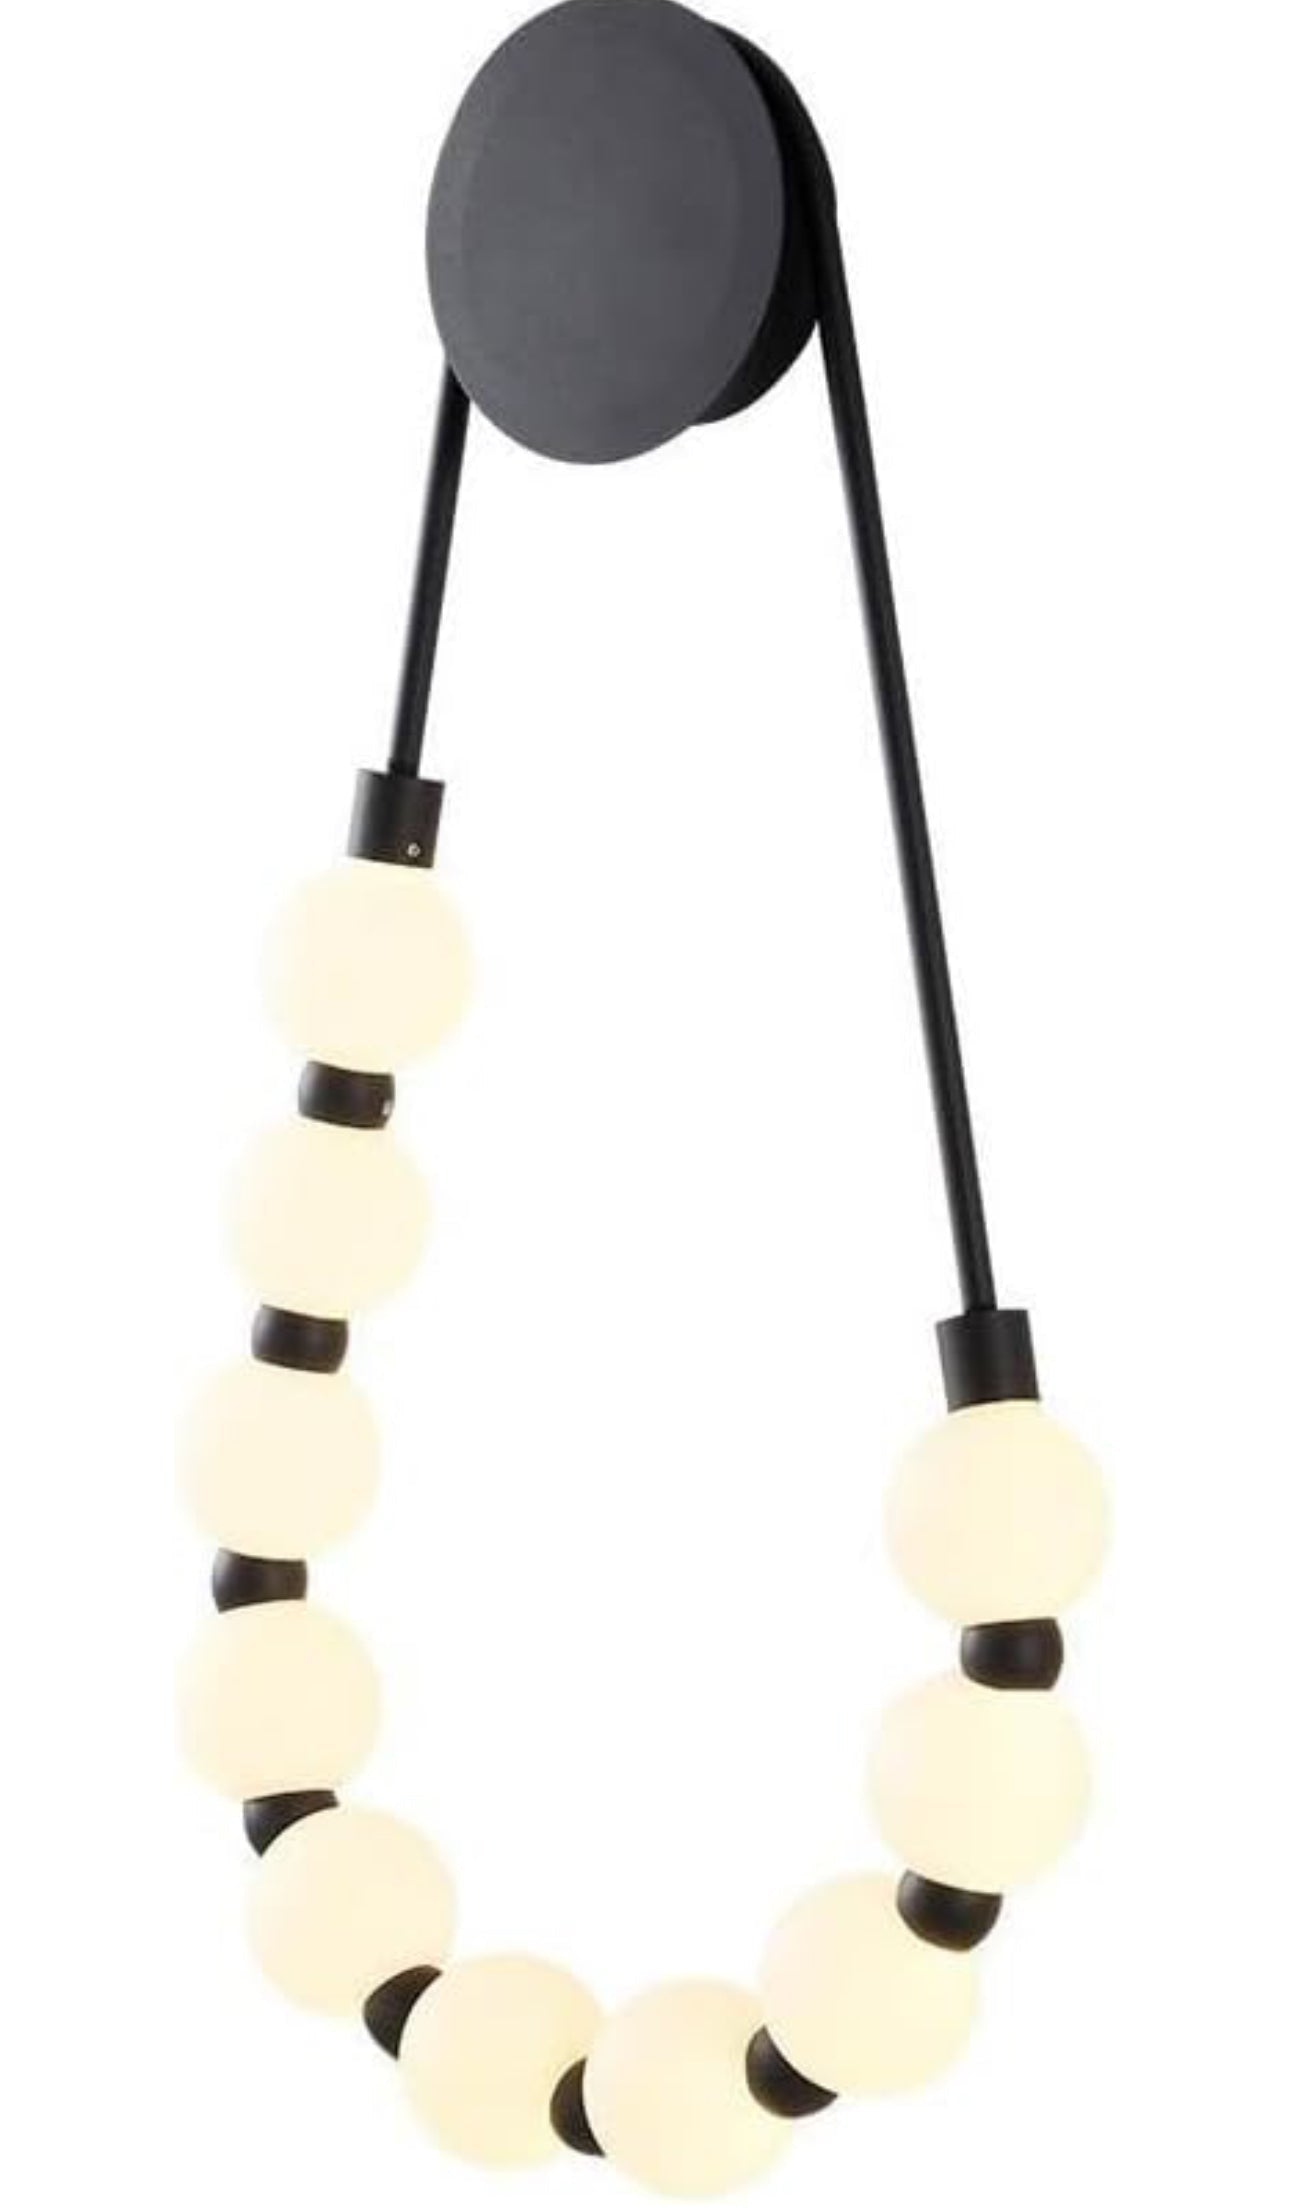 Necklace Wall Lamp | Modern Chain Lighting | Parisian Chic Light Fixture For Homes Restaurants - Sconces